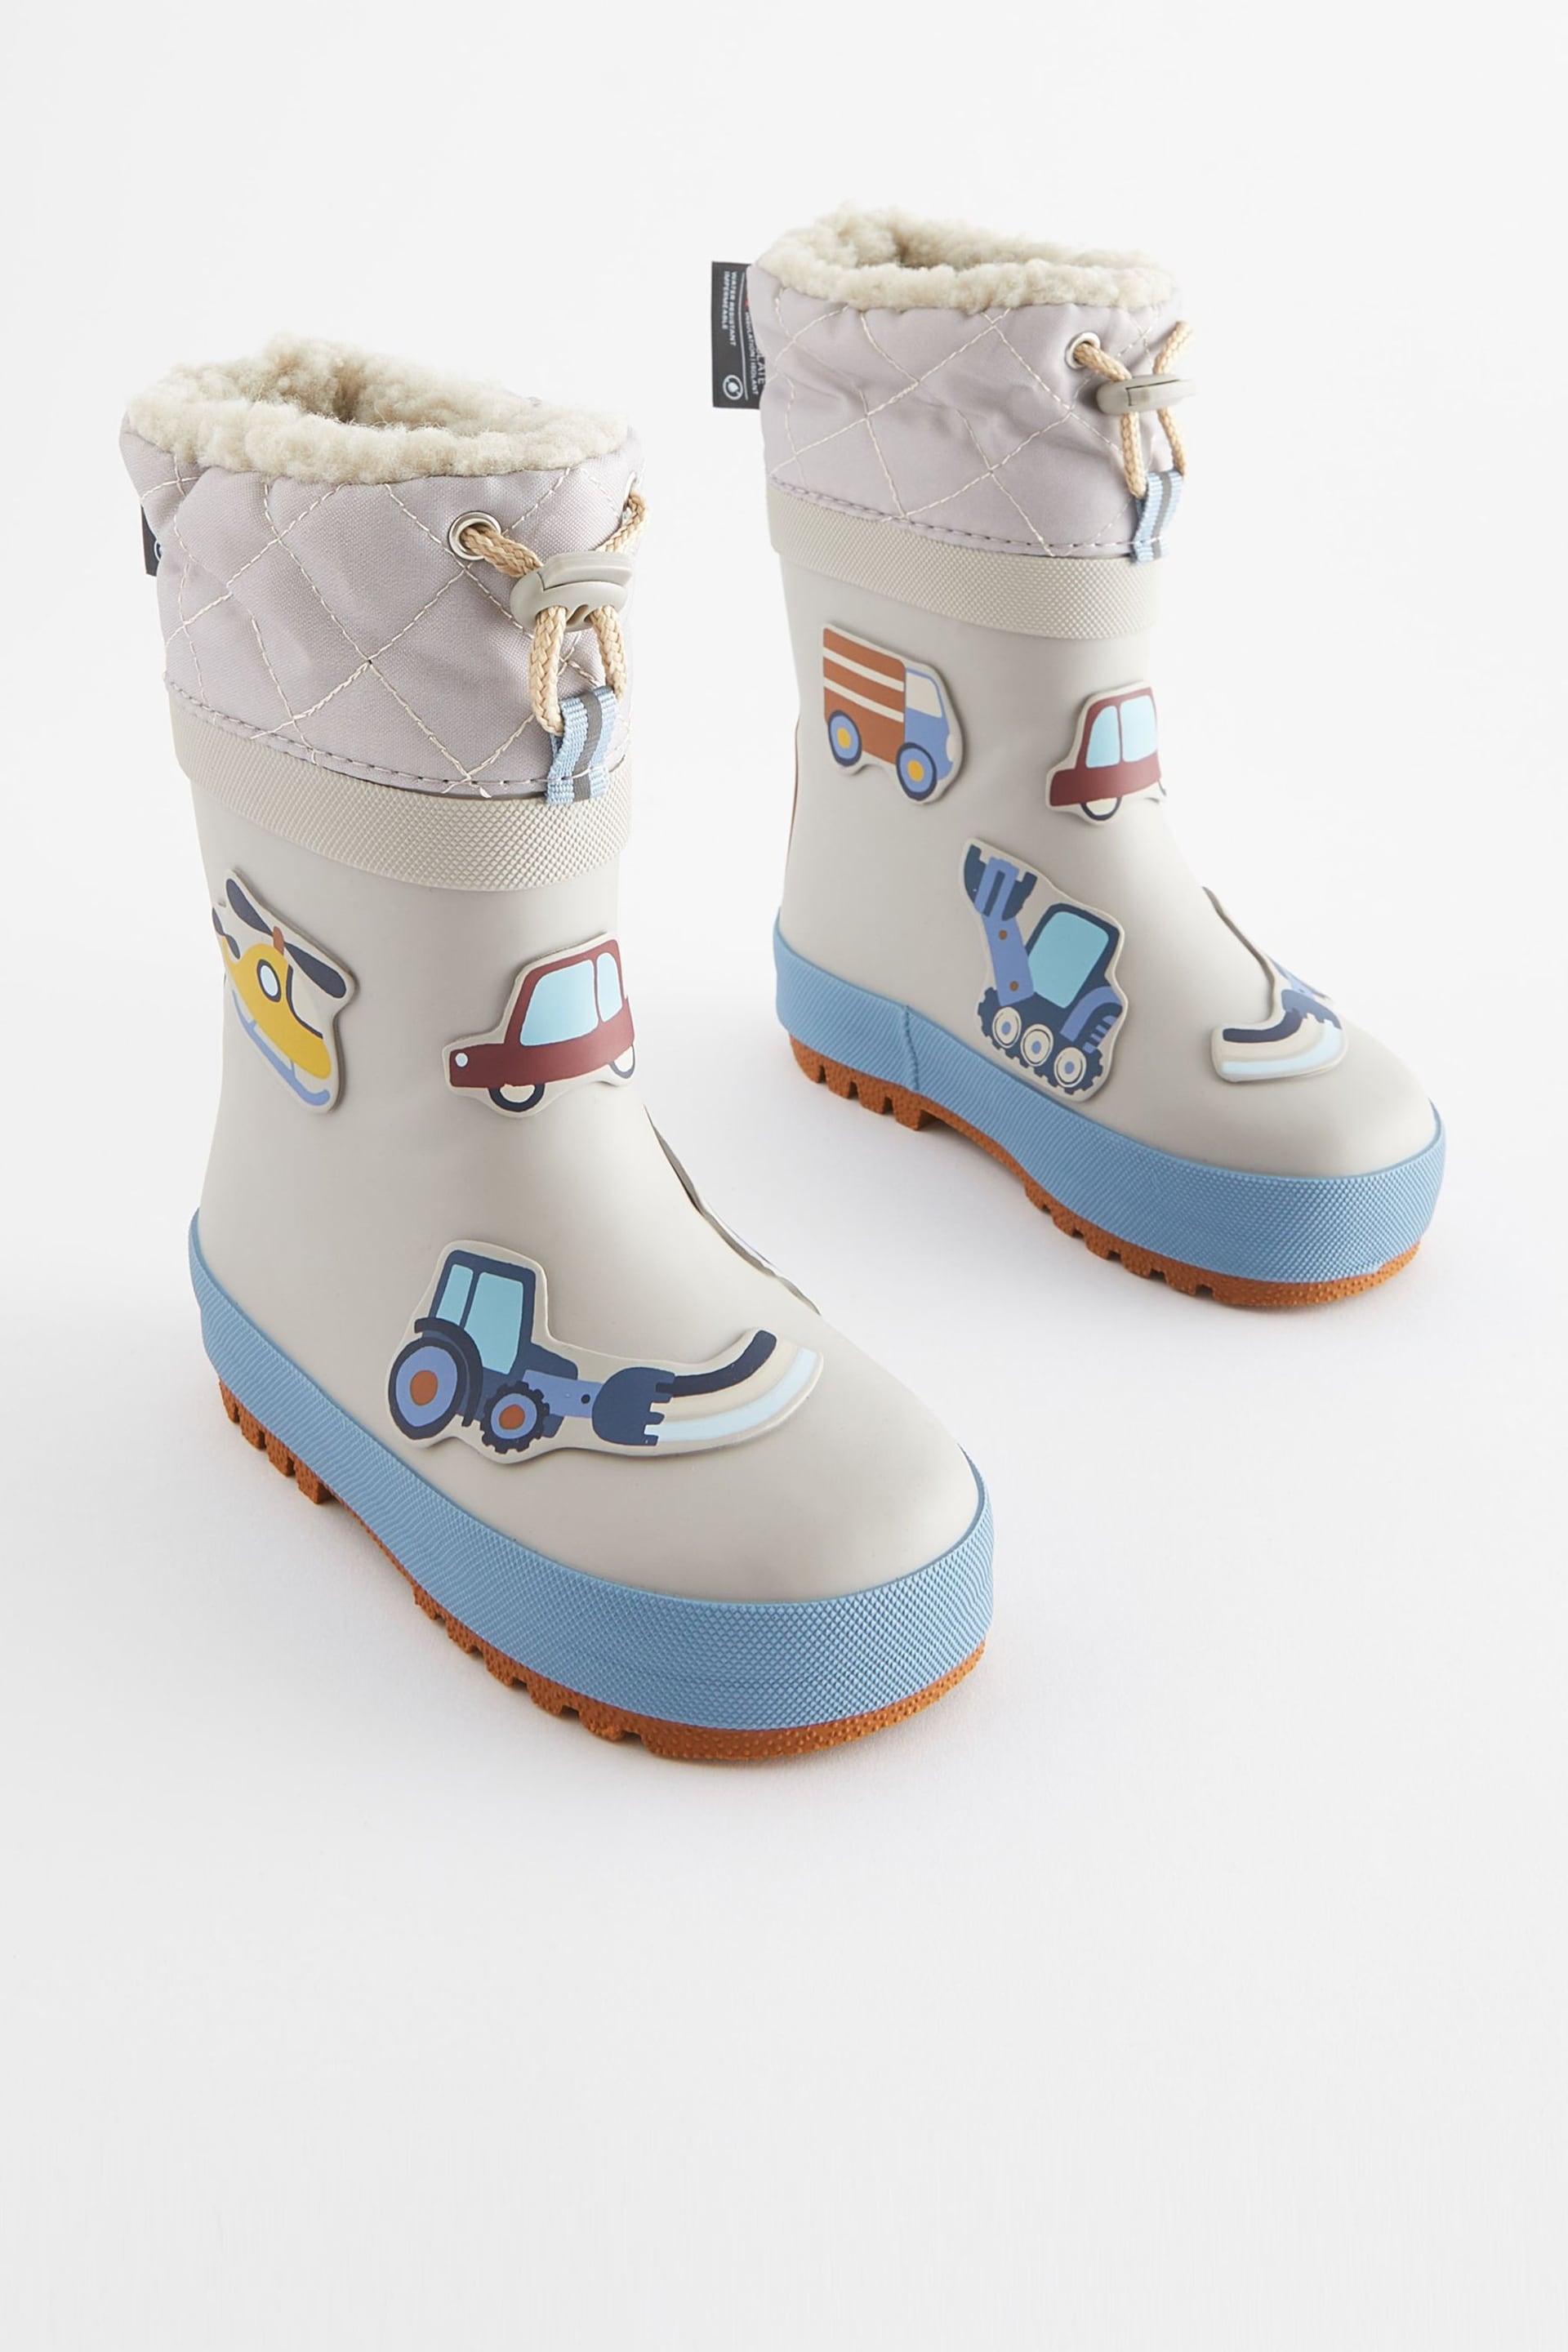 Neutral Transport Cuff Wellies - Image 1 of 6